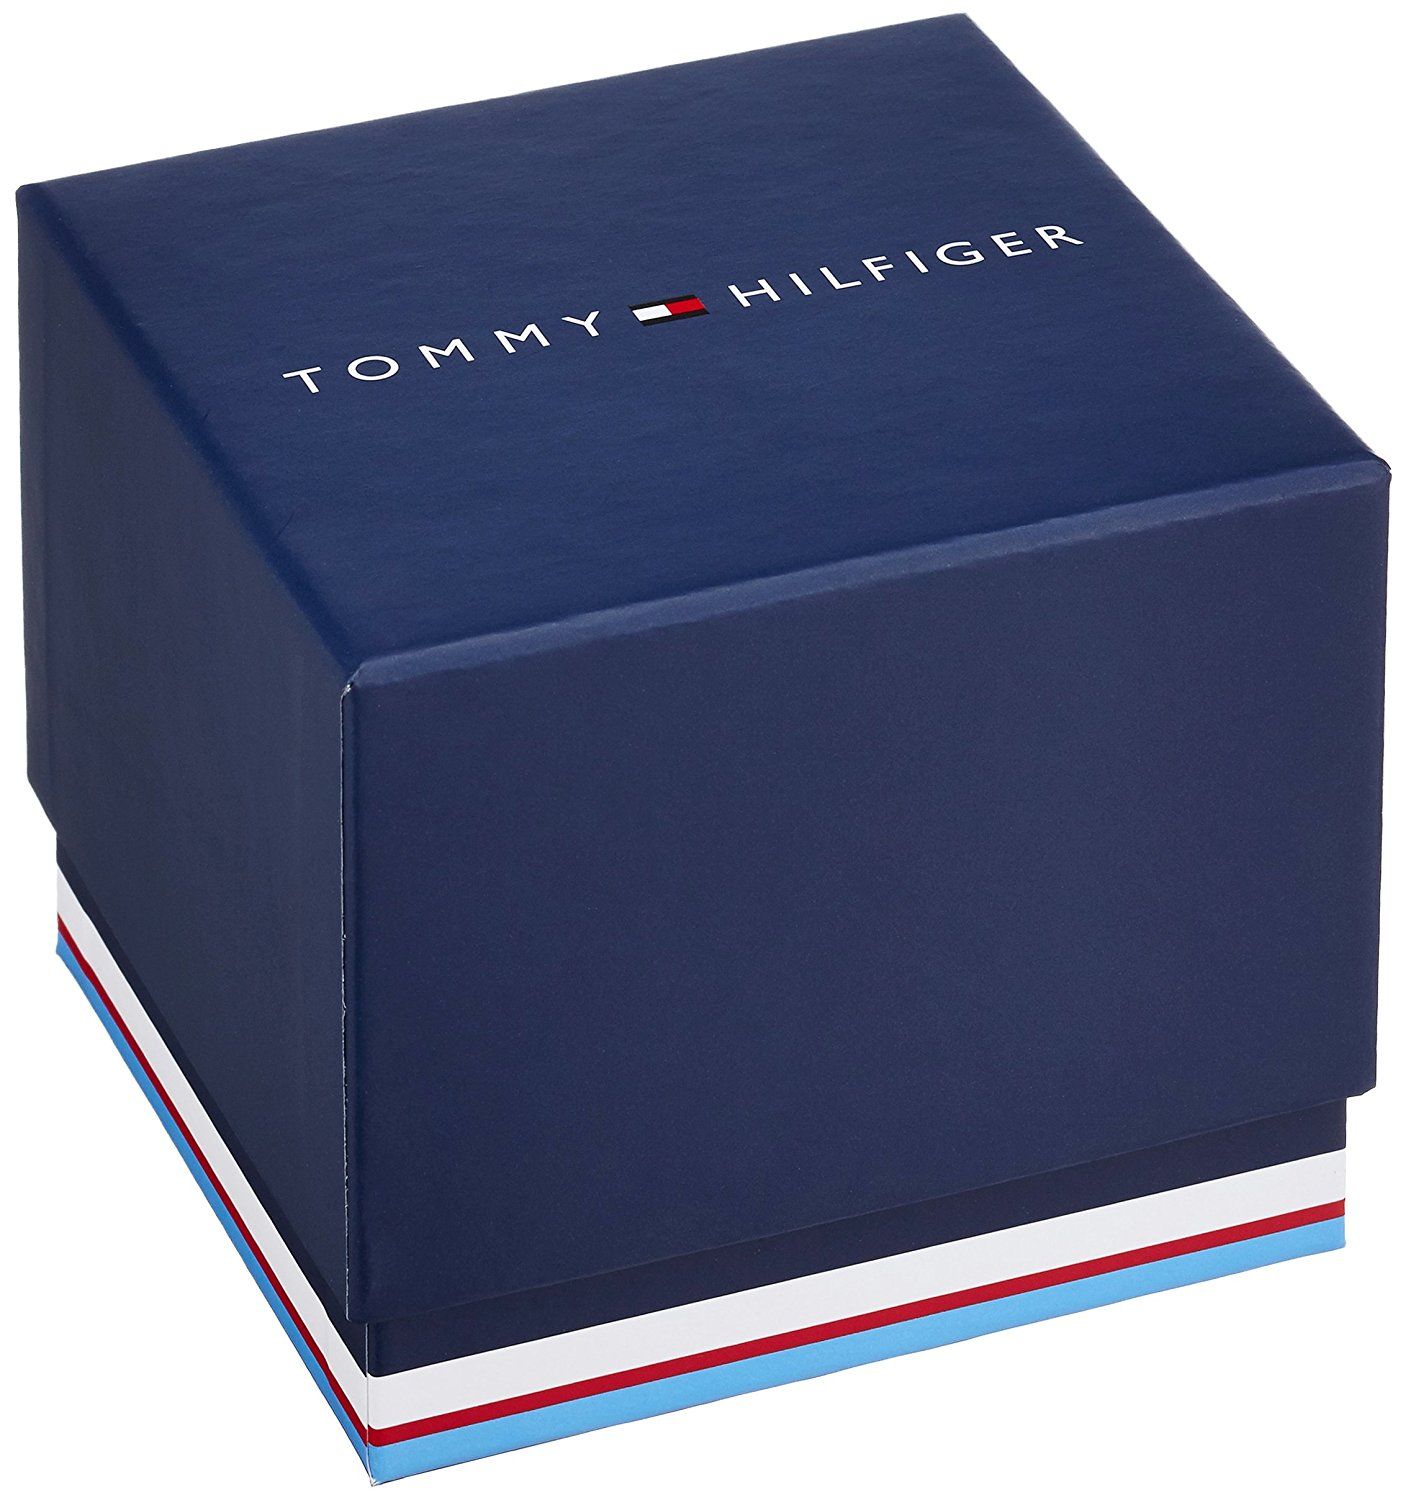 This Tommy Hilfiger Connor Multi Dial Watch for Men is the perfect timepiece to wear or to gift. It's Silver 44 mm Round case combined with the comfortable Blue Rubber watch band will ensure you enjoy this stunning timepiece without any compromise. Operated by a high quality Quartz movement and water resistant to 5 bars, your watch will keep ticking. The classic colours will go great with any outfit . It enables you to easily spice up a normal outfit and add style to your life. -The watch has a calendar function: Day-Date, 24-hour Display High quality 21 cm length and 23 mm width Blue Rubber strap with a Buckle Case diameter: 44 mm,case thickness: 10 mm, case colour: Silver and dial colour: Blue